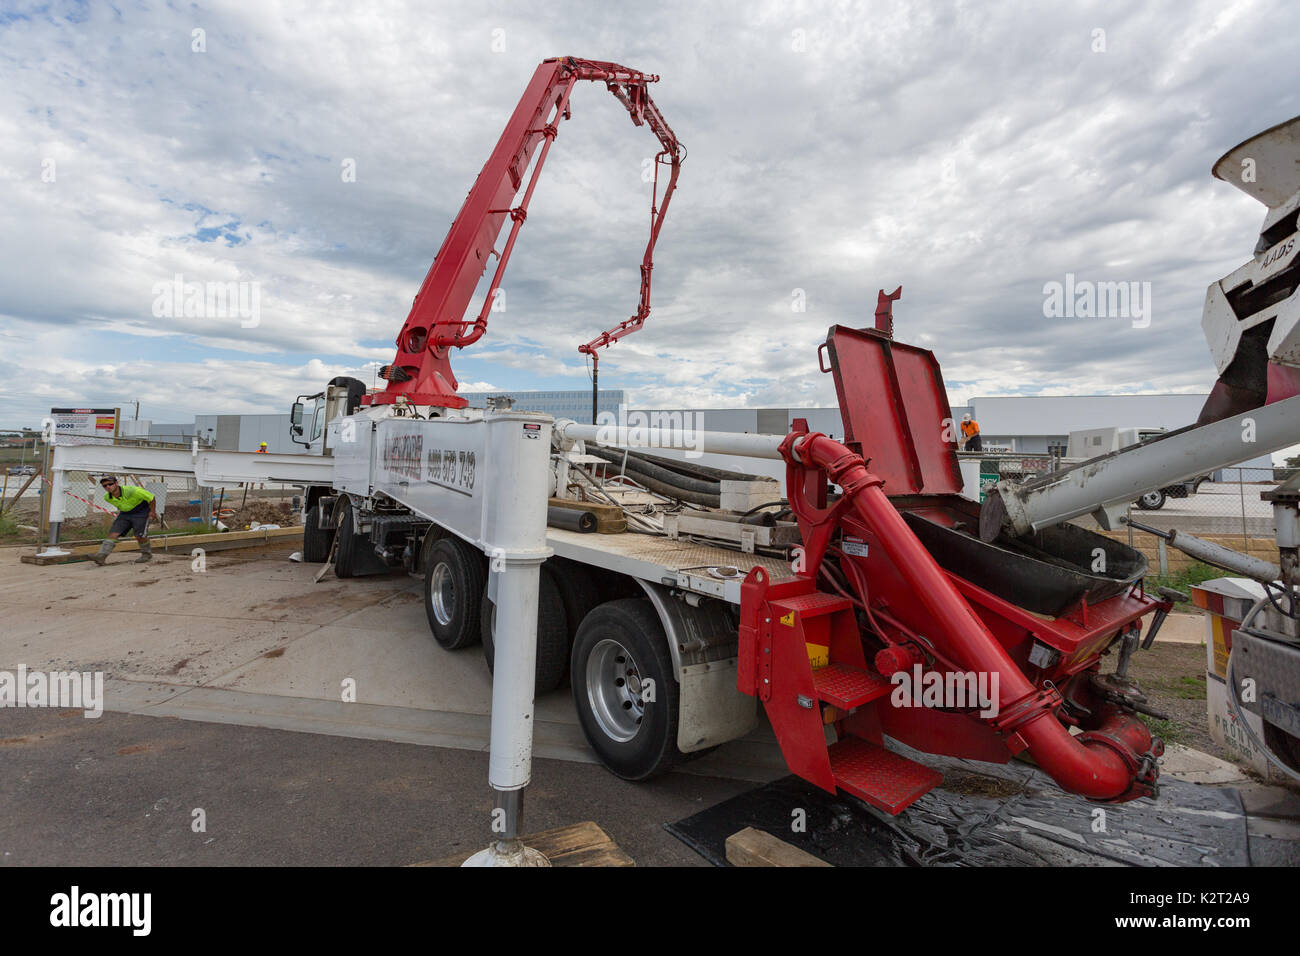 Pumping concrete at construction site. Stock Photo